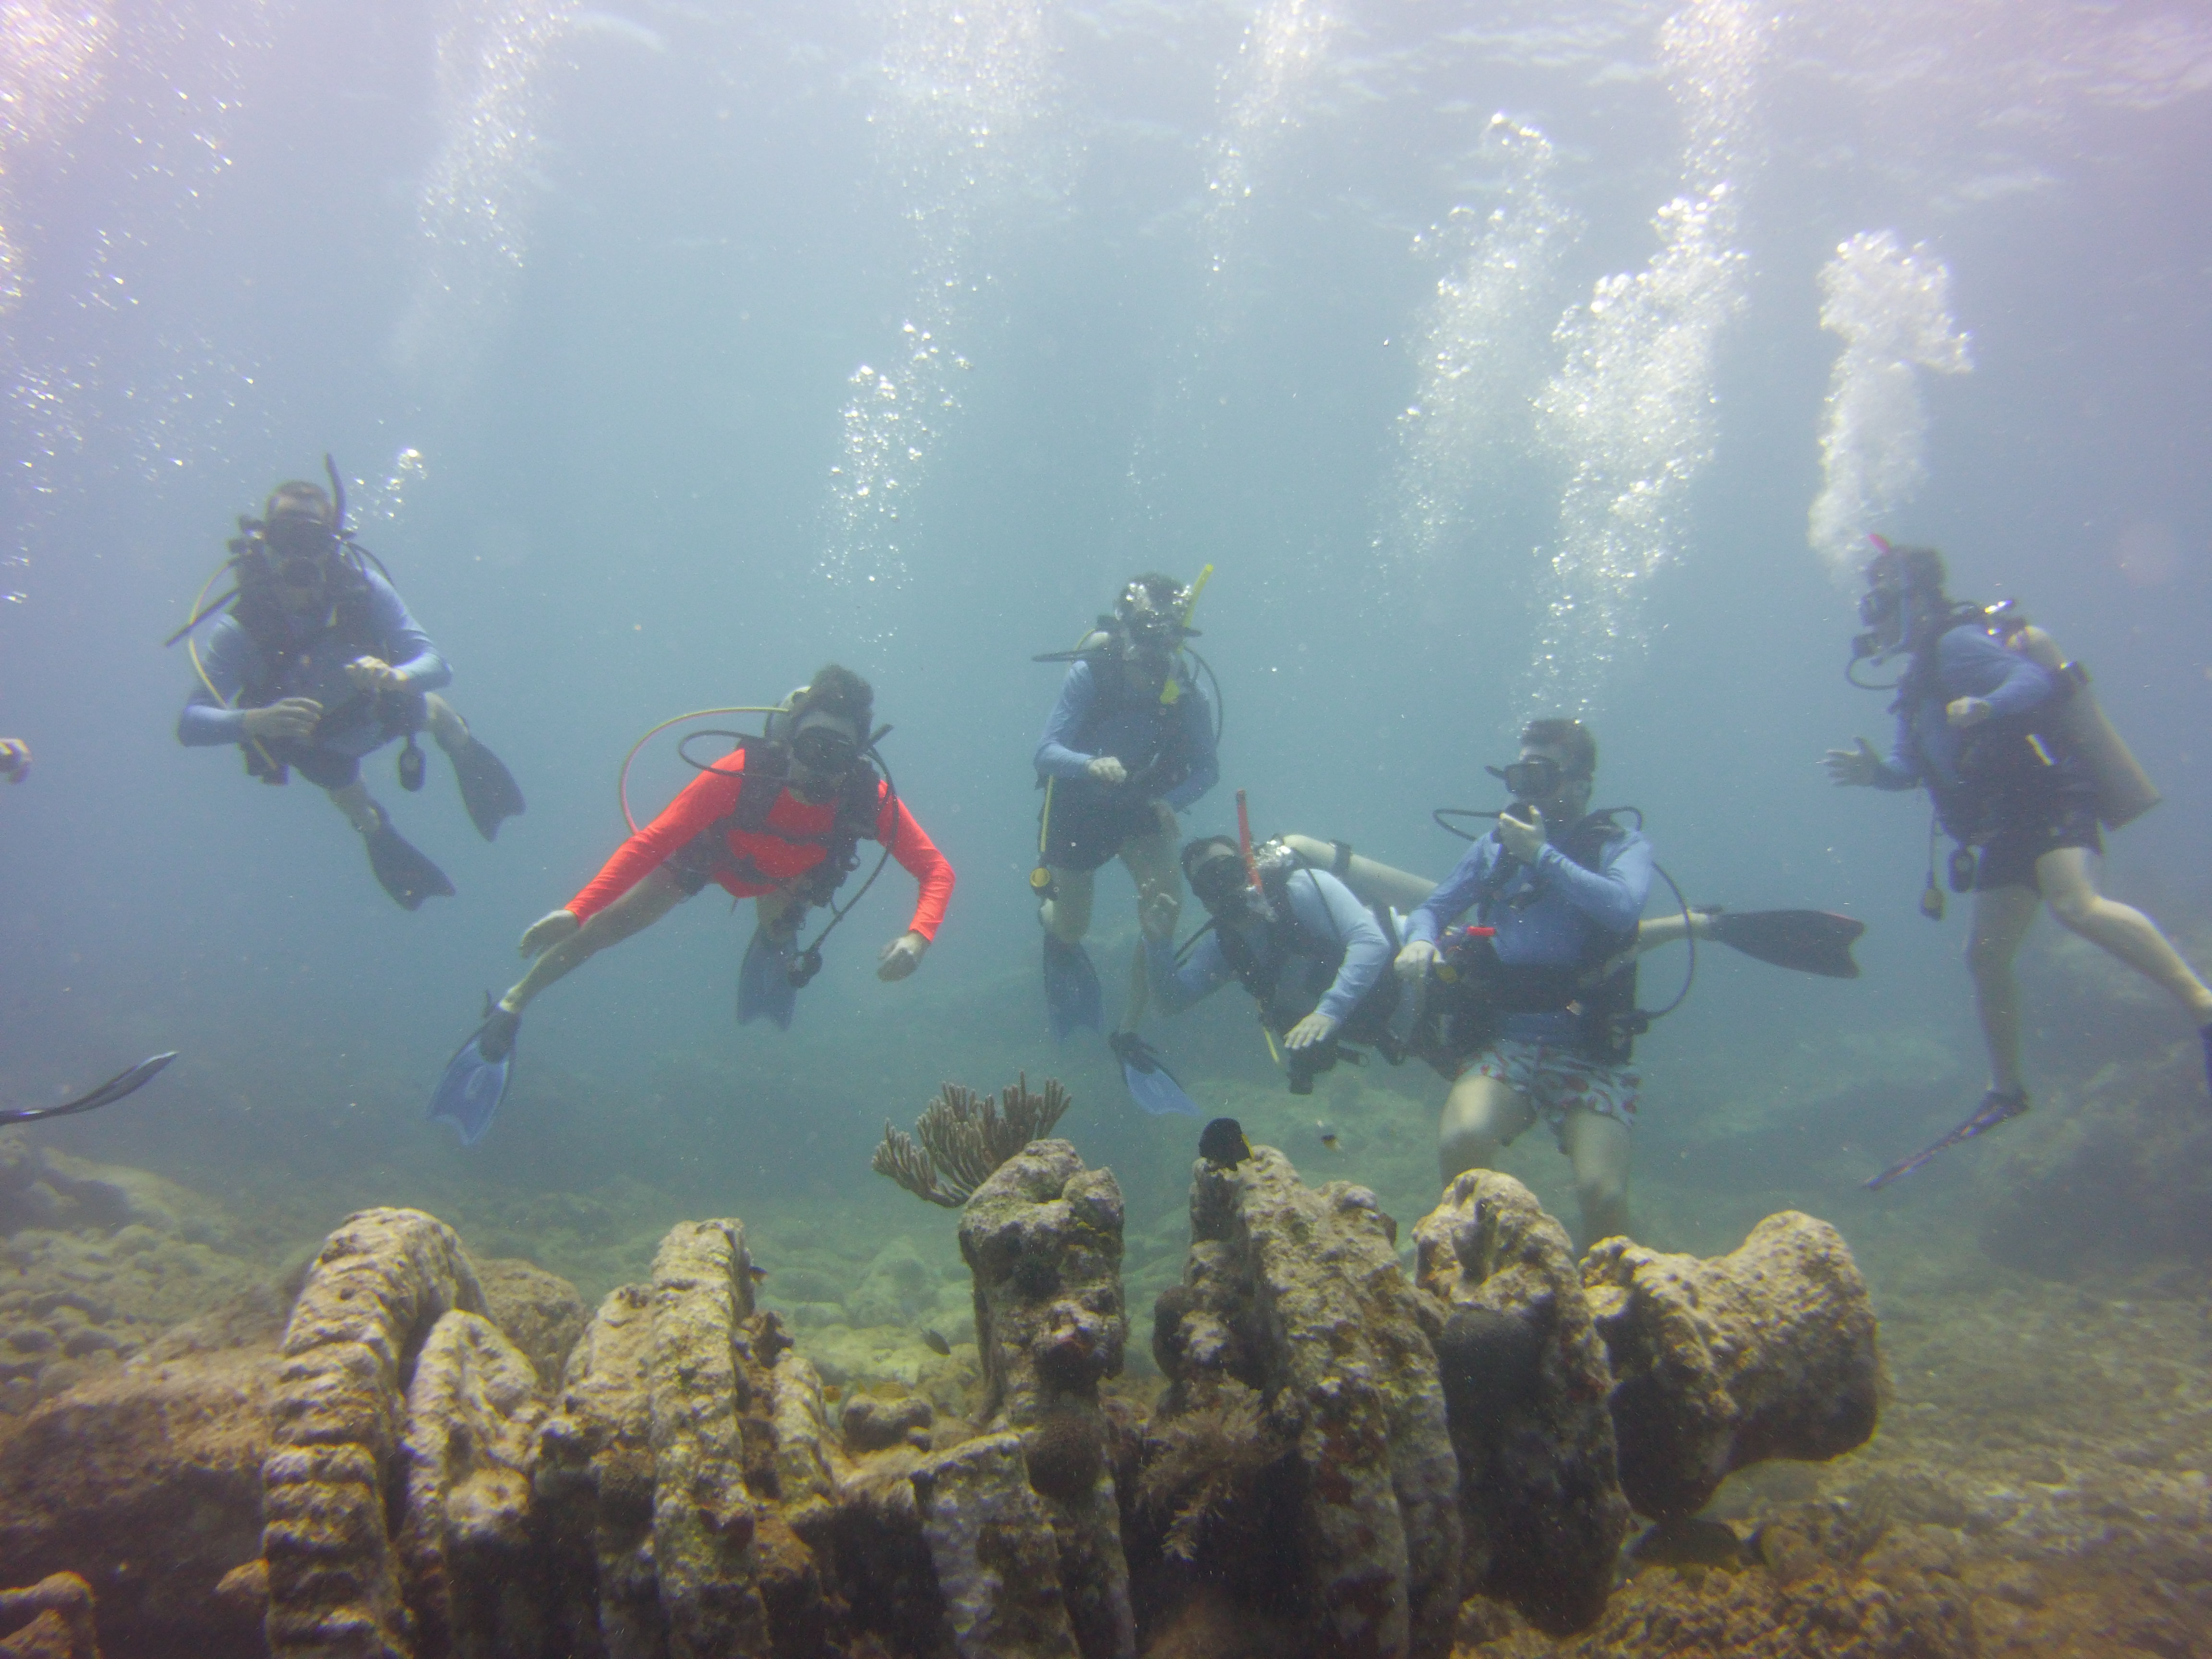 SCUBA divers at molasses reef winch hole